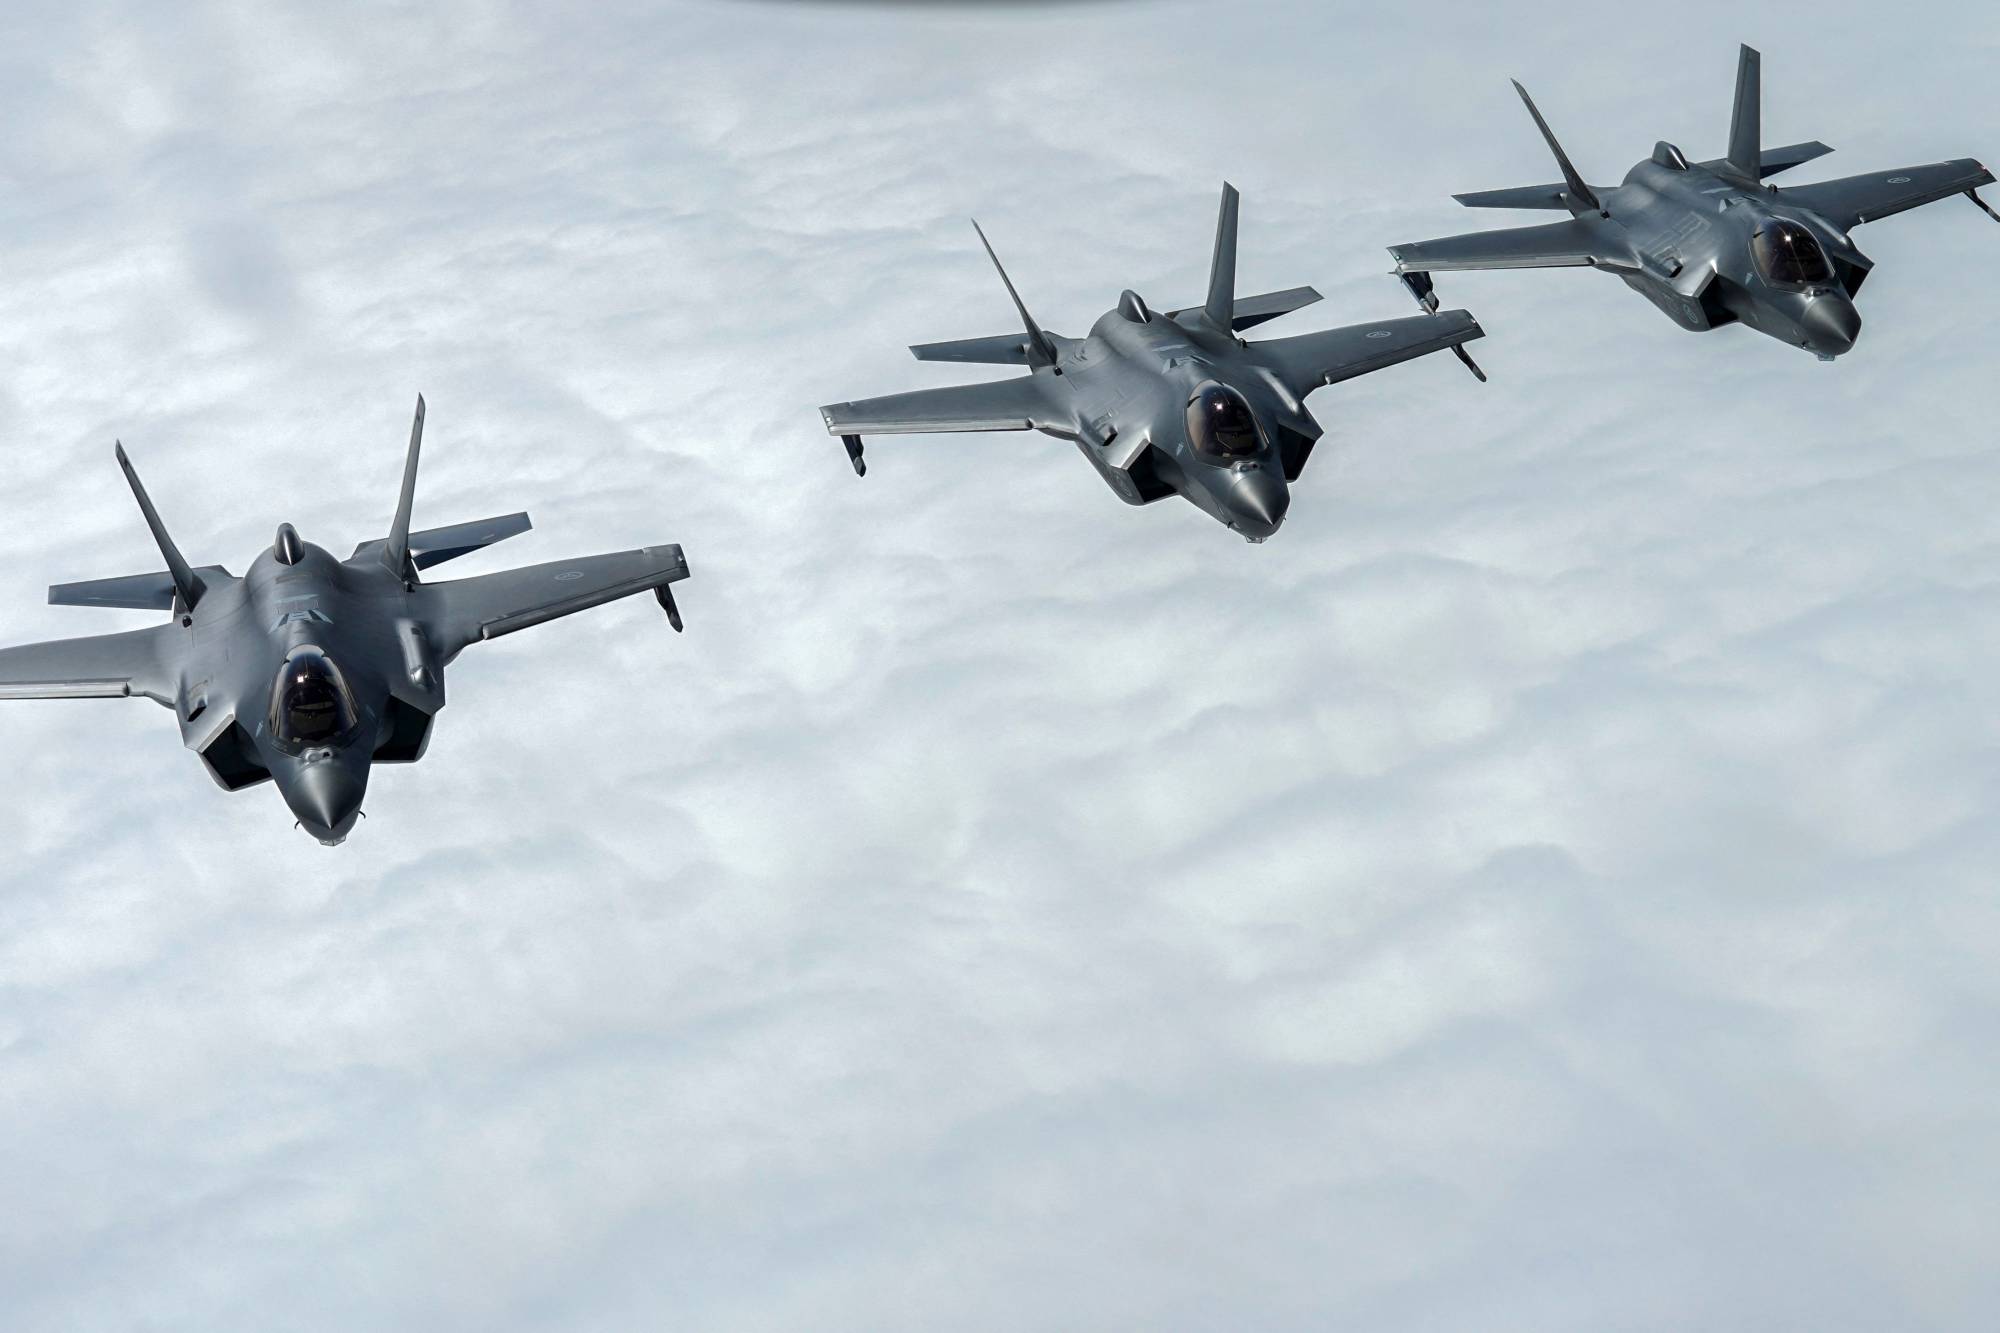 Norwegian F-35 Lightning fighter jets fly during the Arctic Challenge Exercise near Orland Main Air station, Norway, on Thursday. Around 150 aircraft from 14 countries as well as NATO are participating and are flying from four bases, two in Finland, one in Sweden and Orland in Norway.  | AFP-JIJI